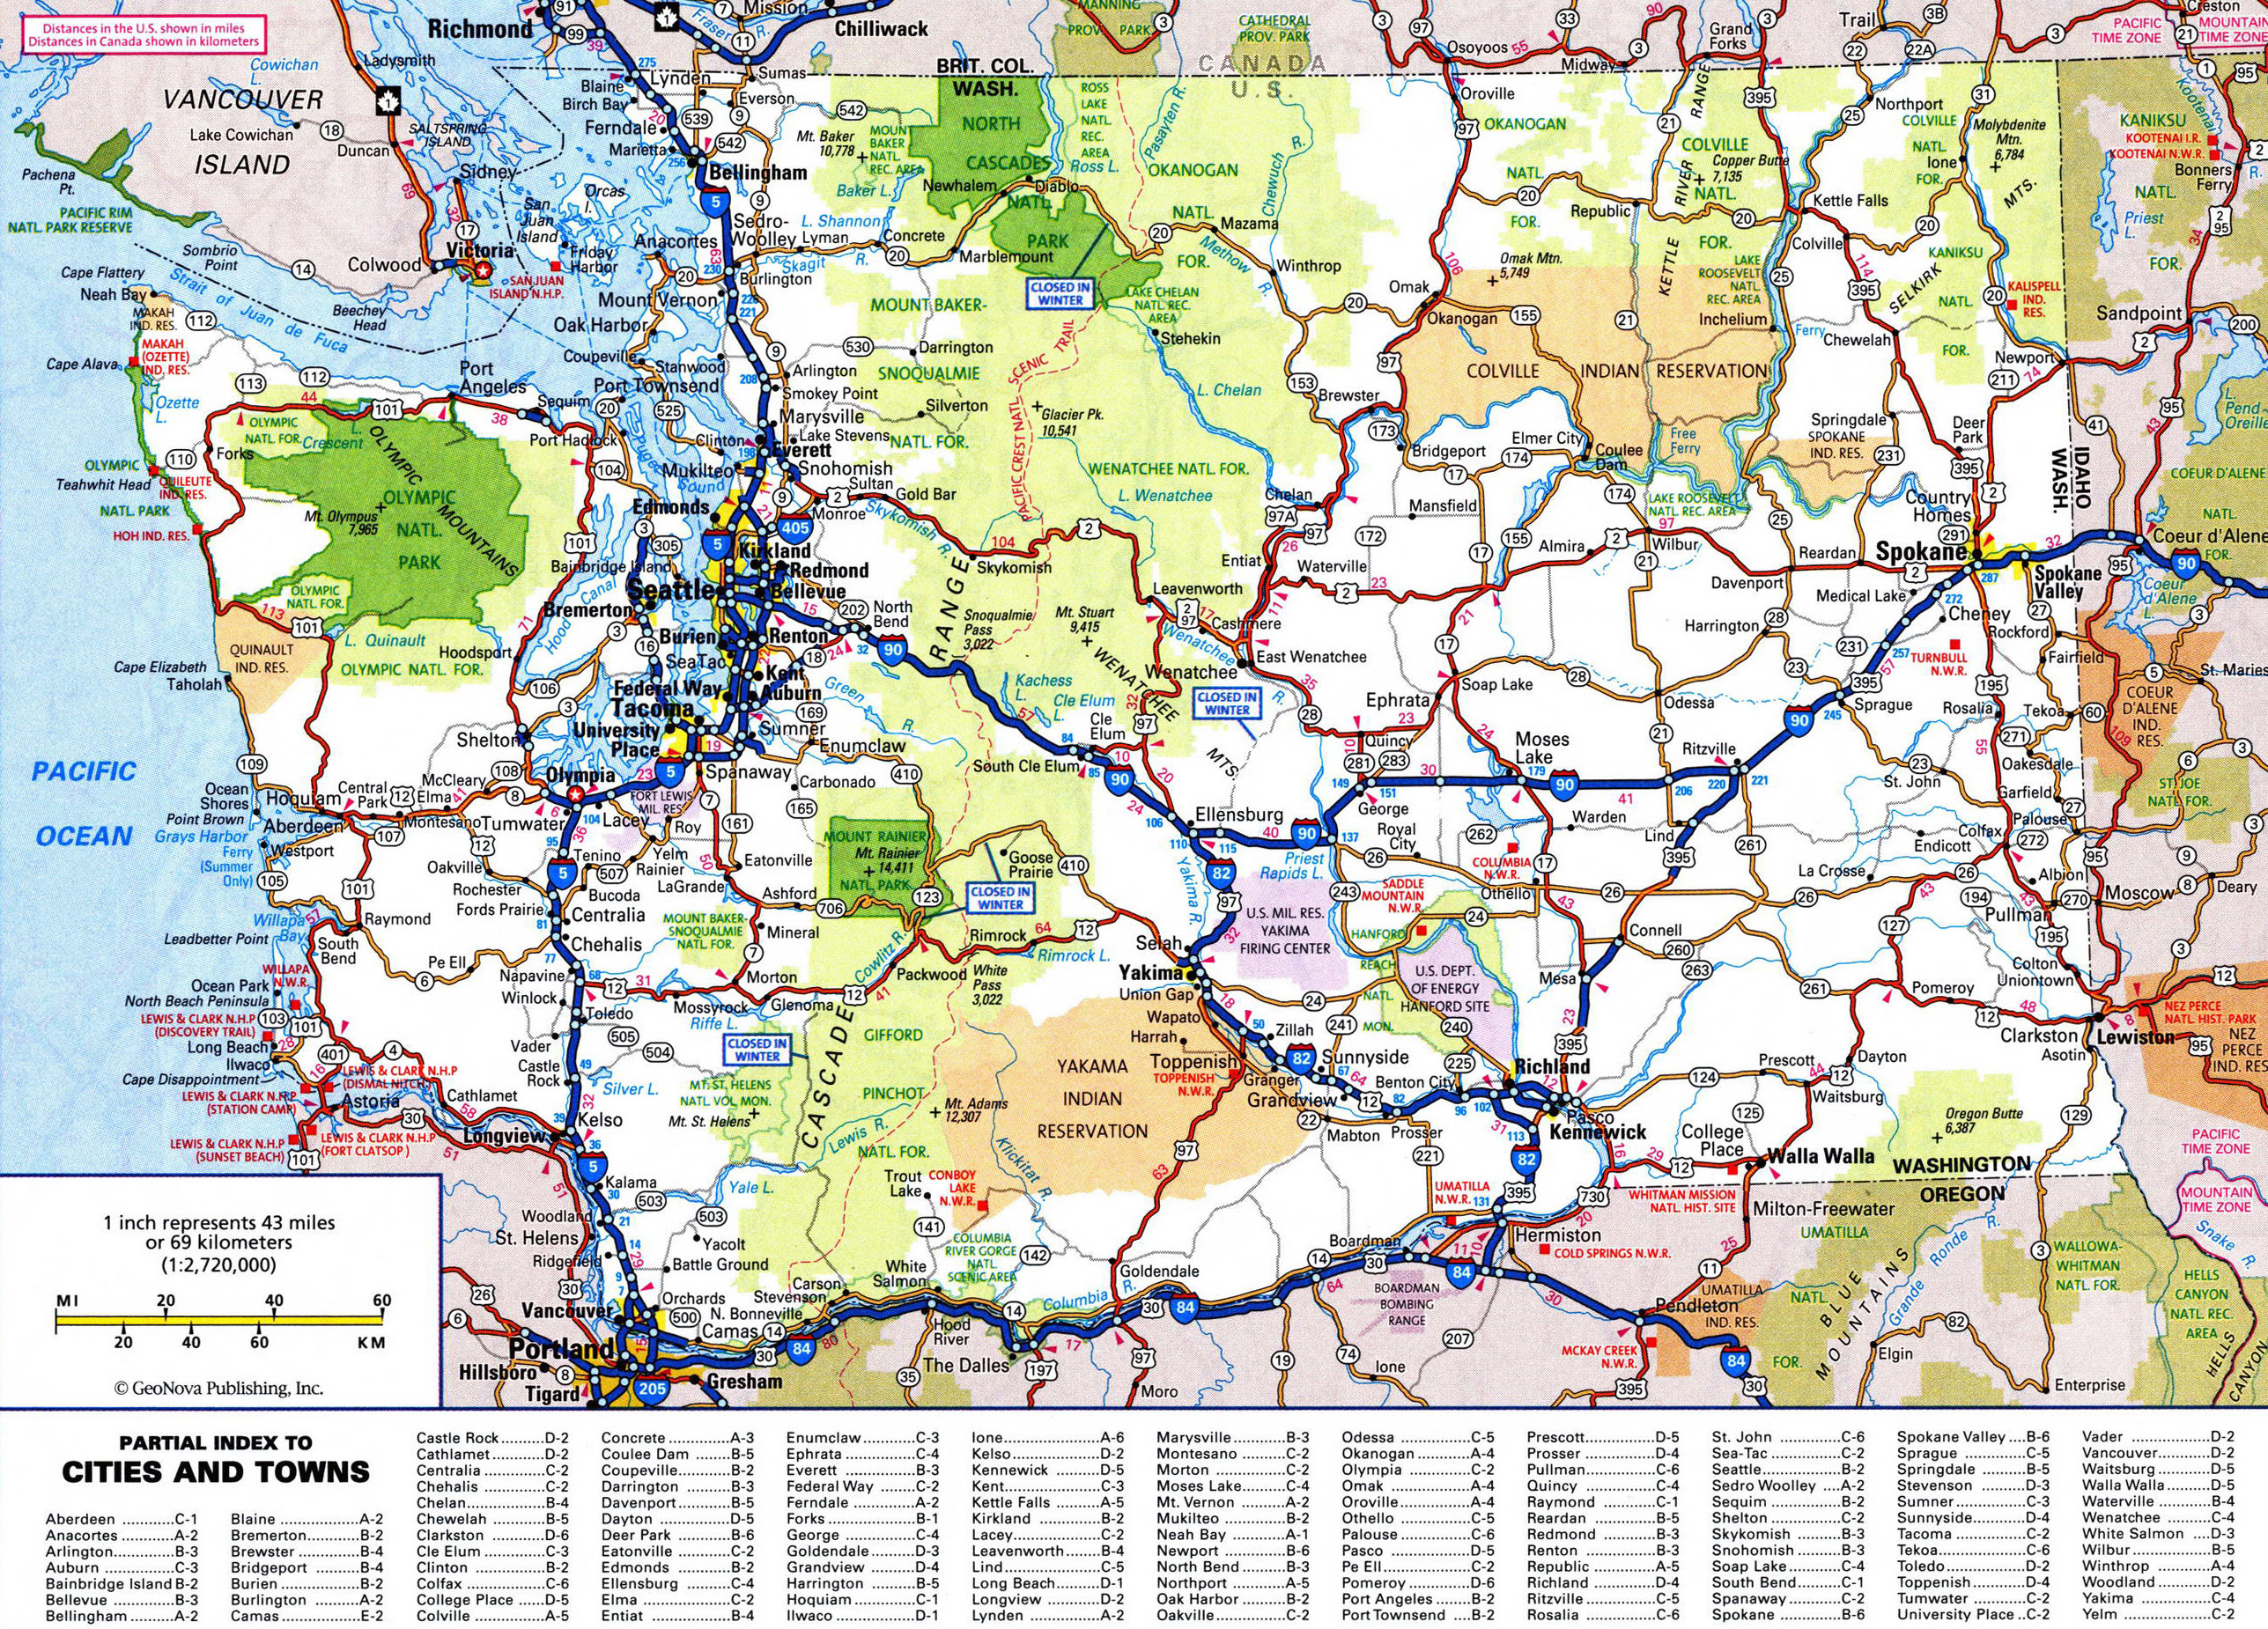 Large Detailed Roads And Highways Map Of Washington State With All Cities And National Parks Washington State Usa Maps Of The Usa Maps Collection Of The United States Of America